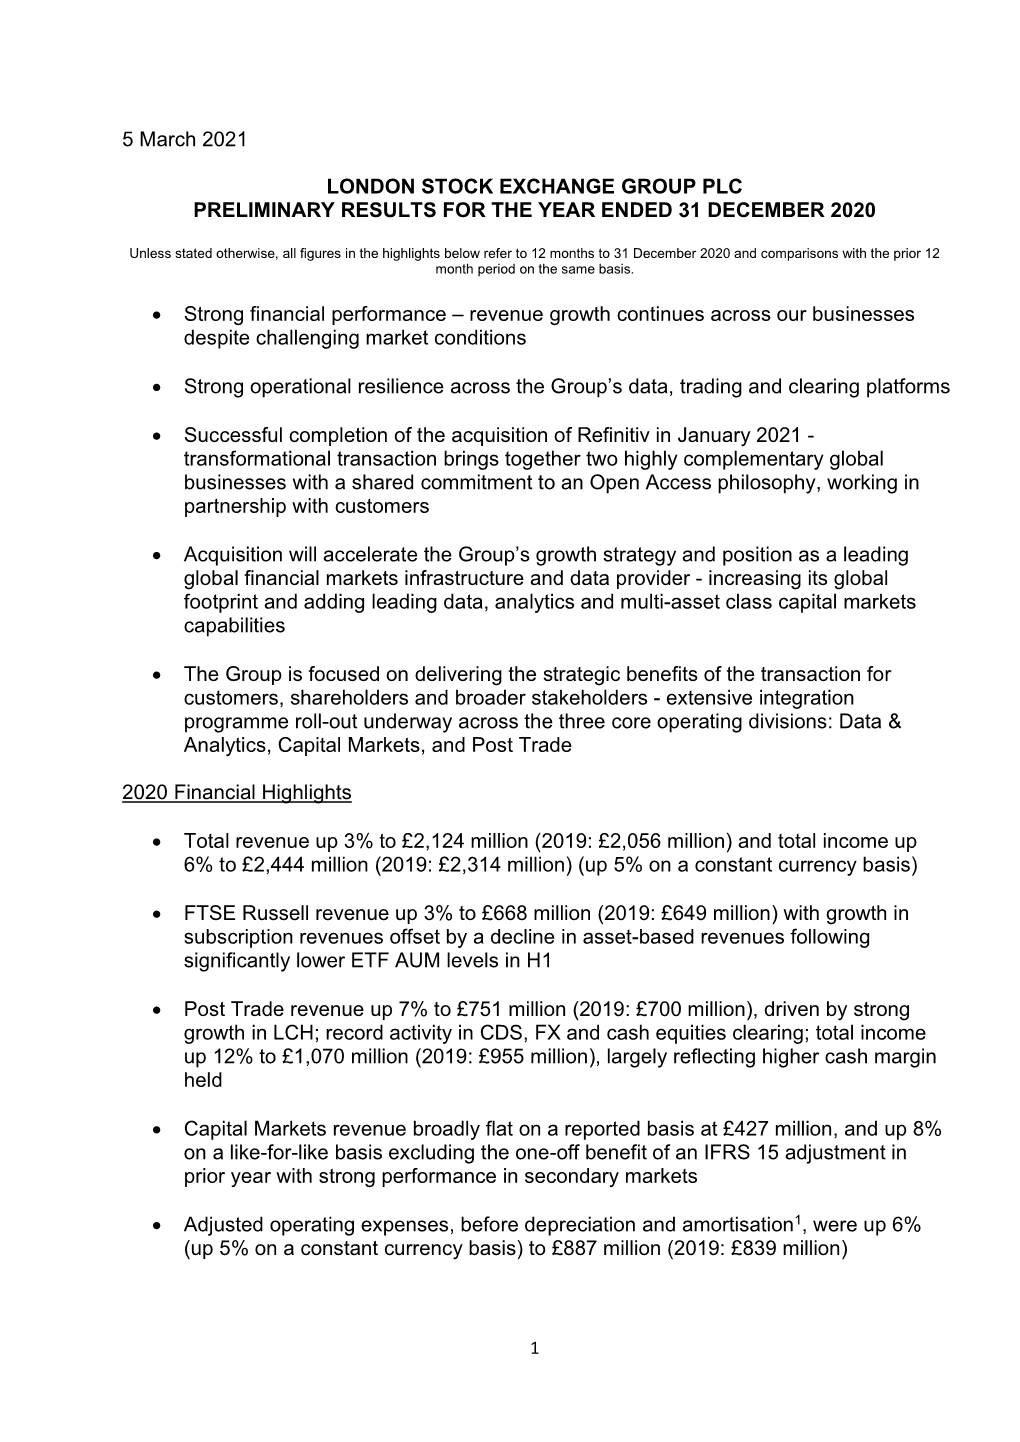 LSEG 2020 Preliminary Results RNS 5 March 2021